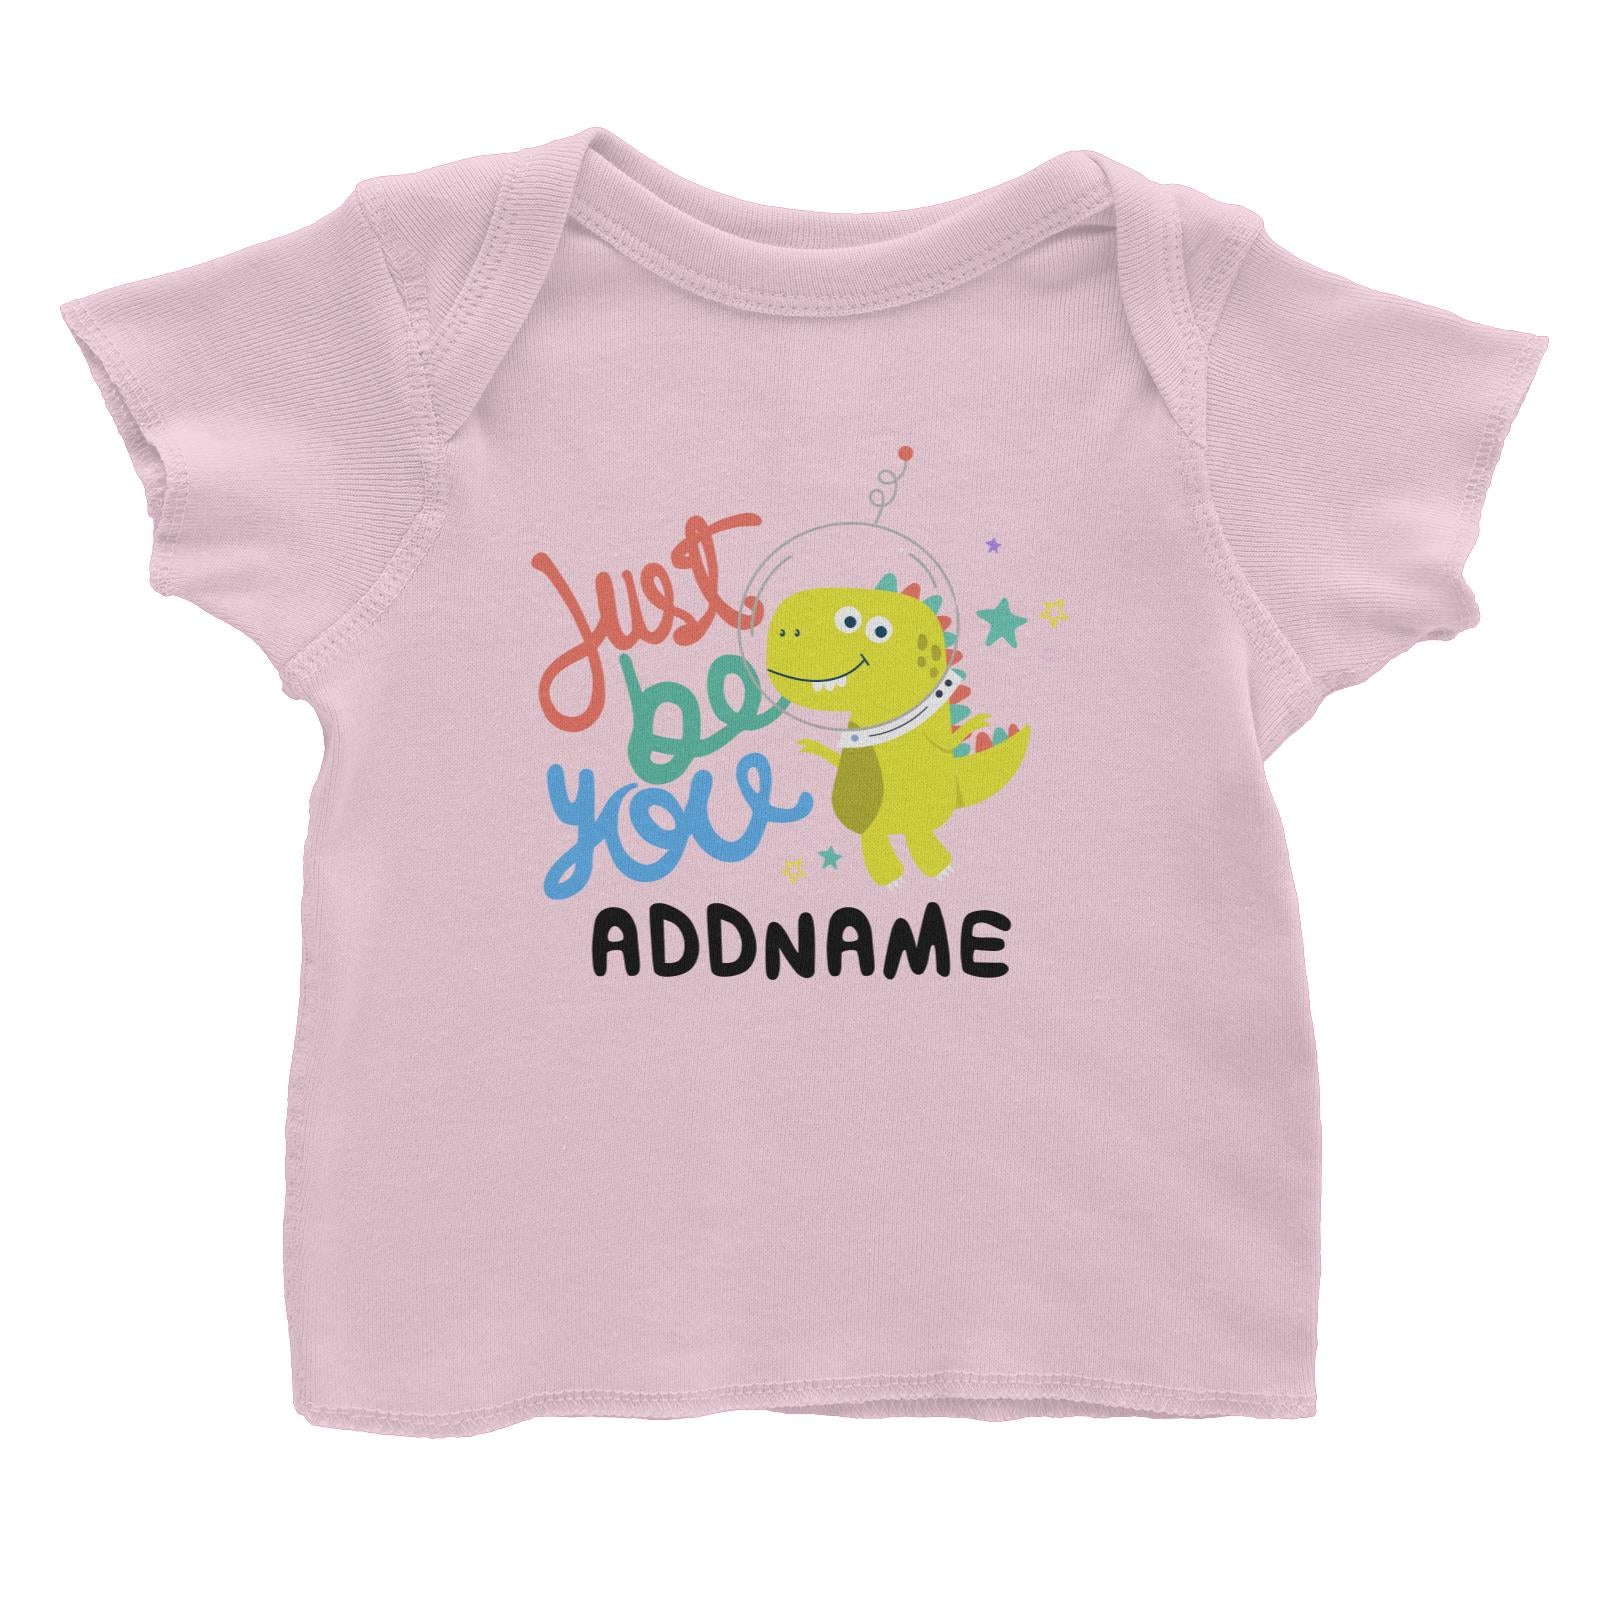 Children's Day Gift Series Just Be You Space Dinosaur Addname Baby T-Shirt